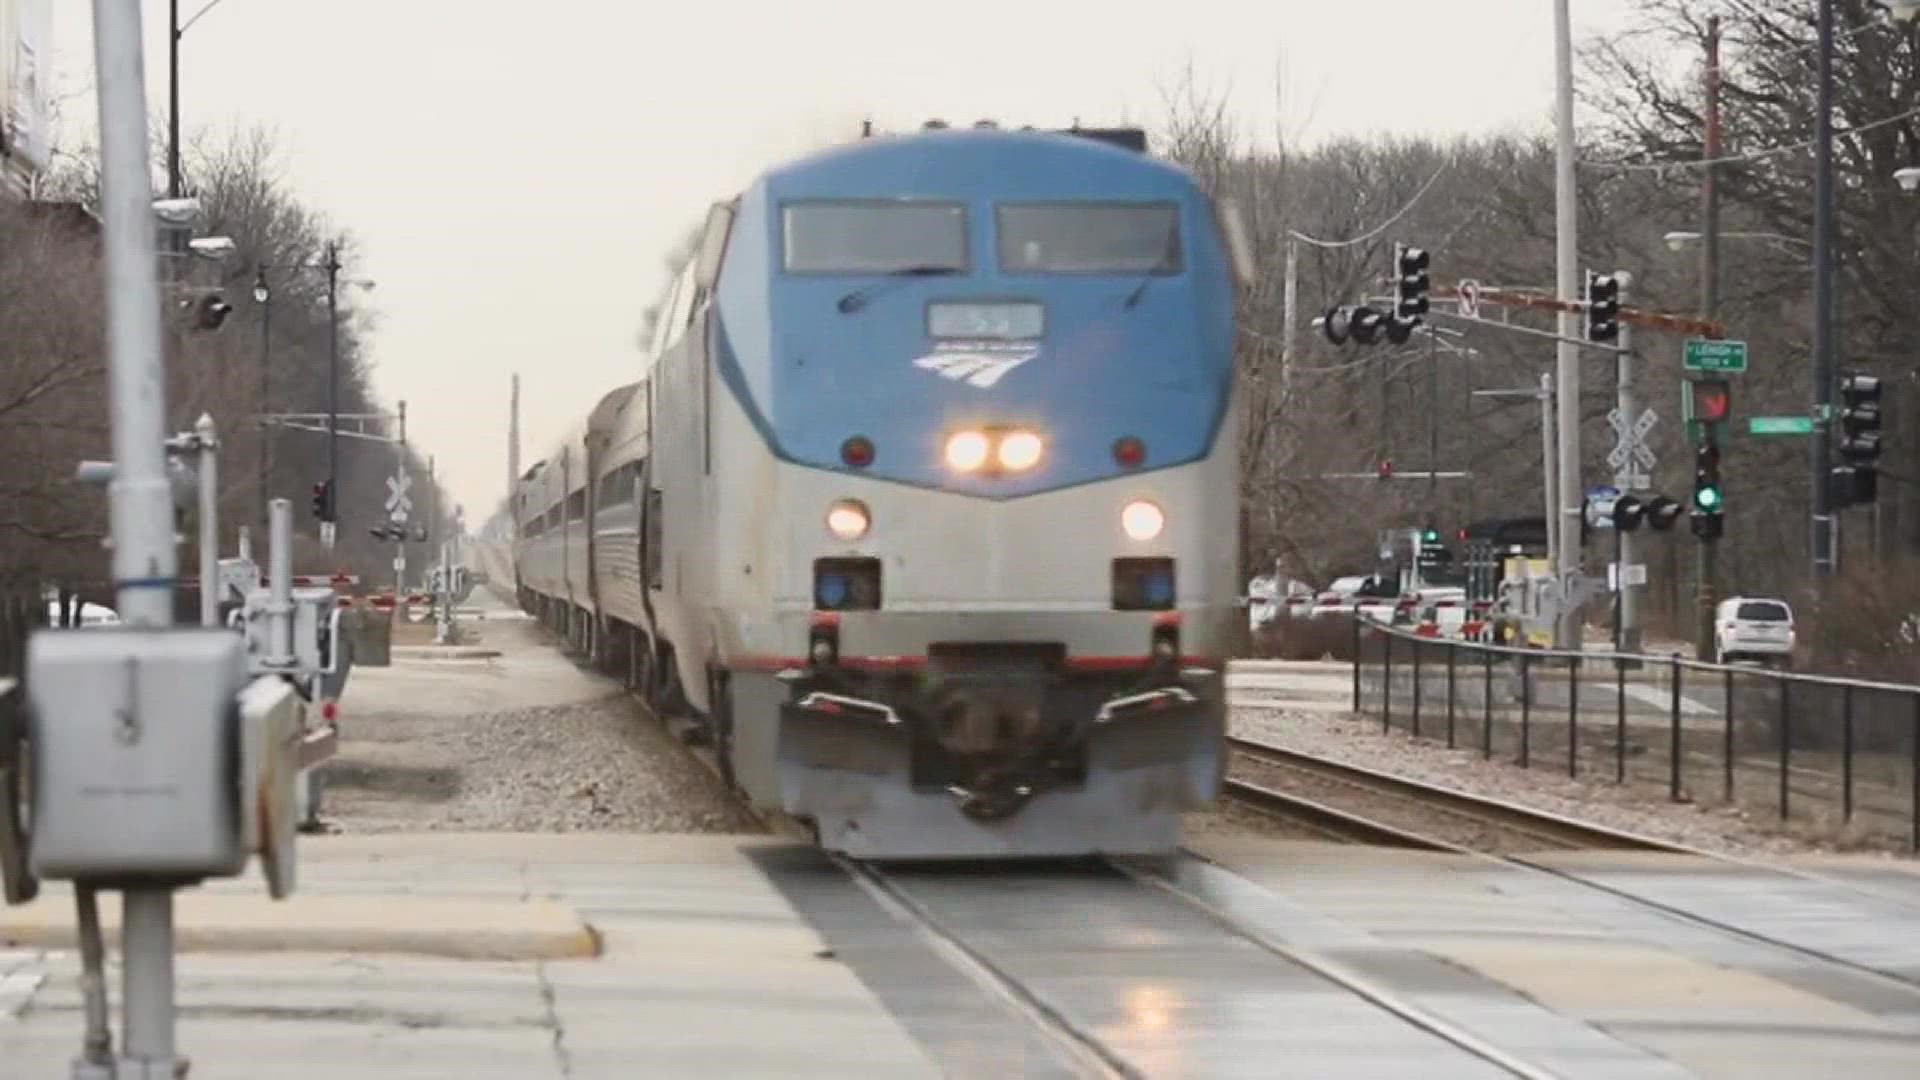 Congress passed an infrastructure package which includes $66 billion for Amtrak project such as the Quad City stop between Chicago and Moline.